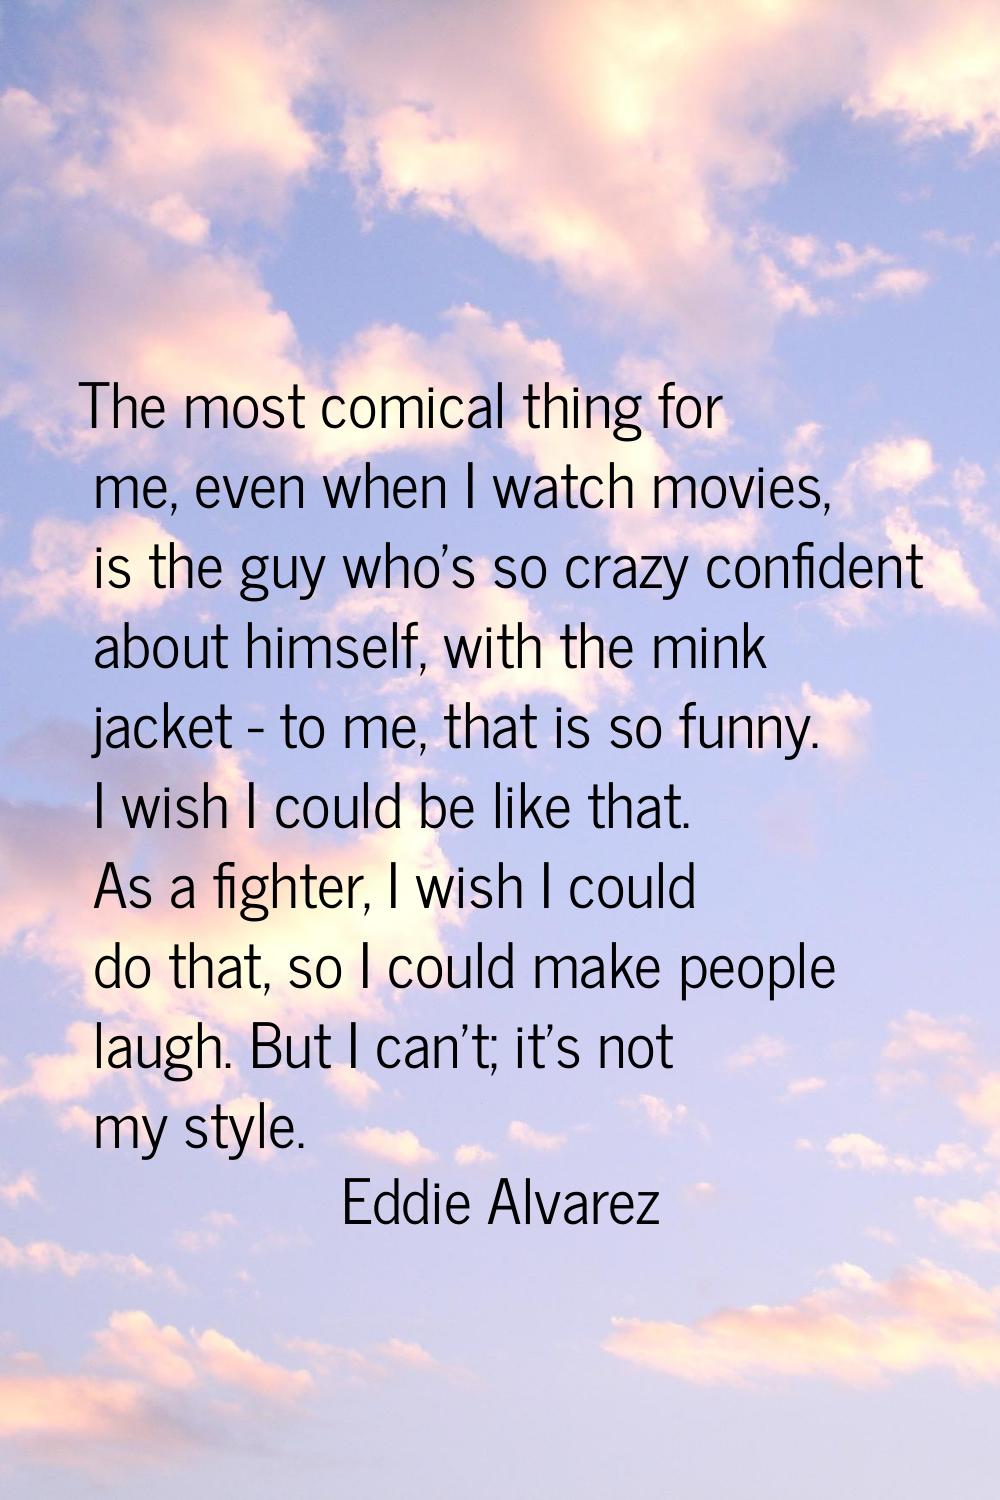 The most comical thing for me, even when I watch movies, is the guy who's so crazy confident about 